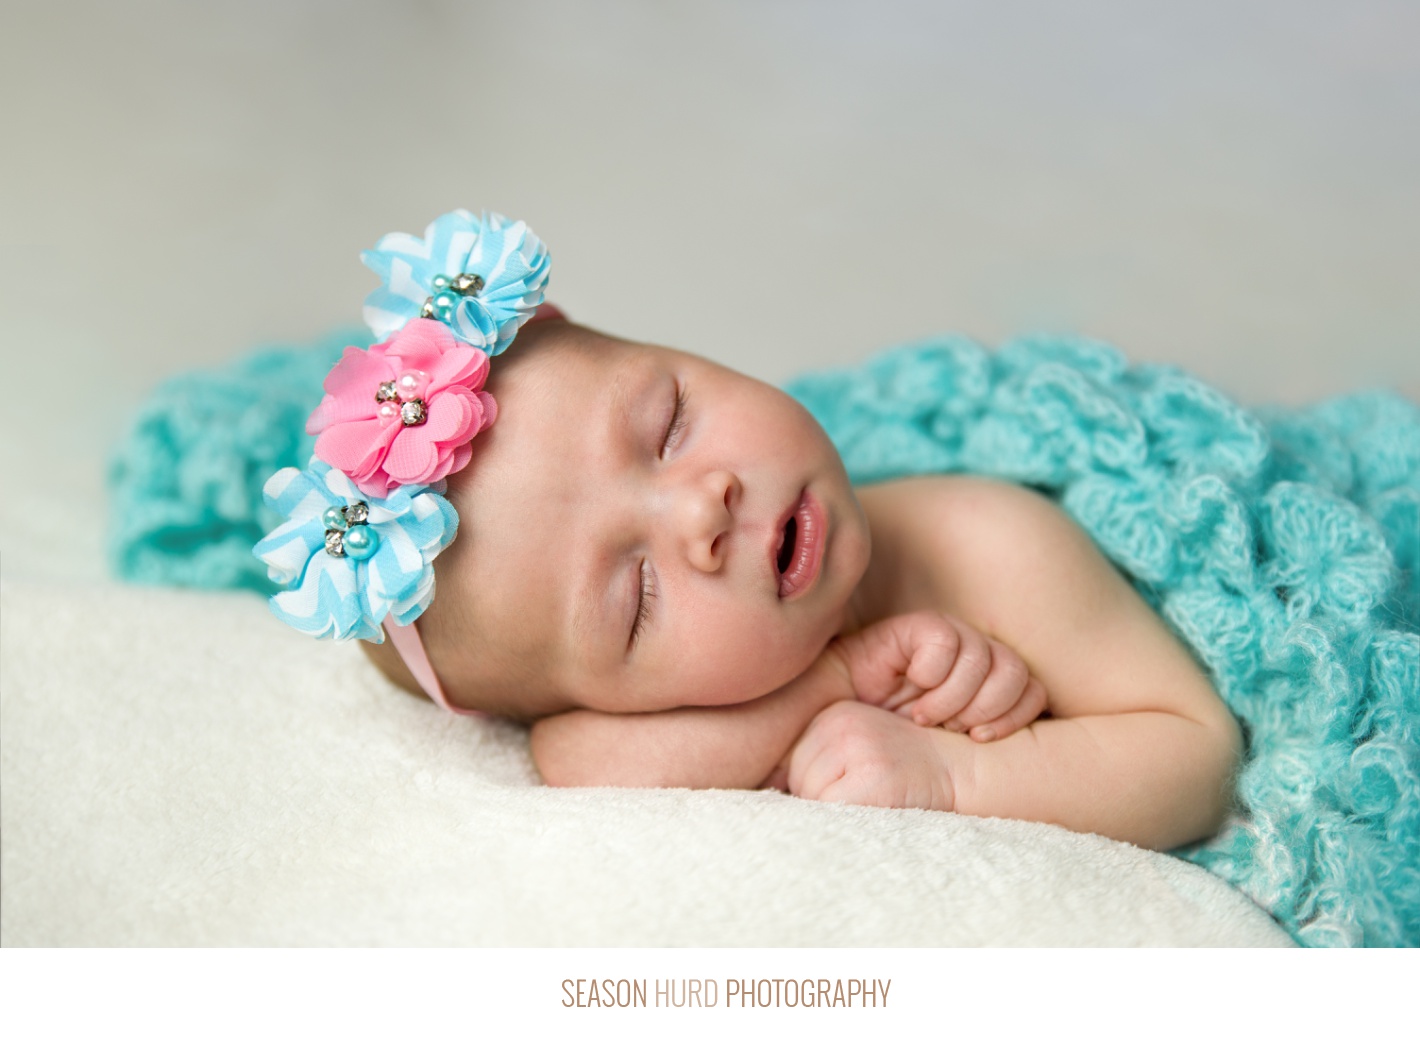 Newborn girl with long eyelashes in turquoise and pink